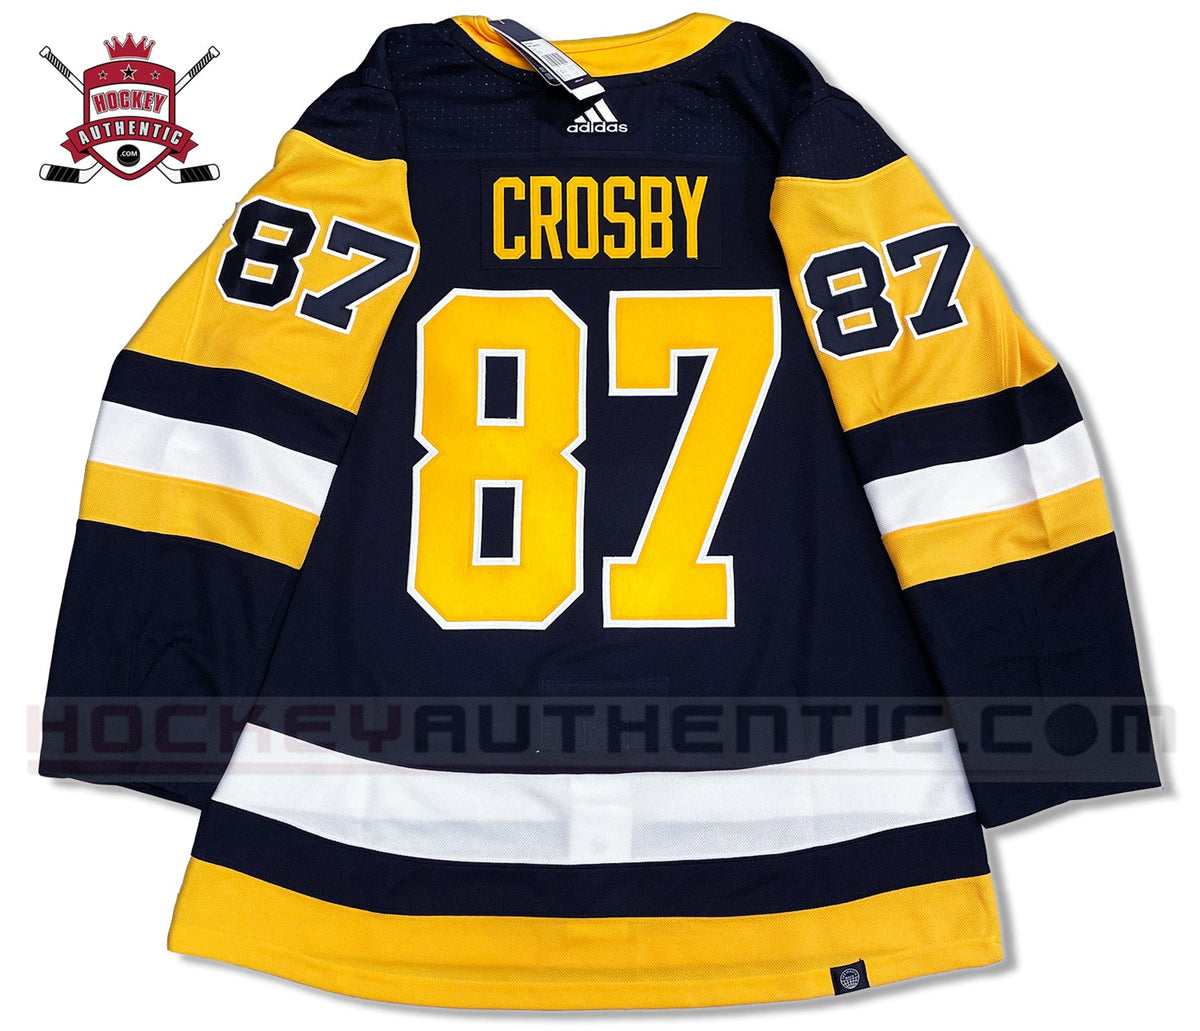 Sidney Crosby Pittsburgh Penguins Autographed Black Adidas Jersey